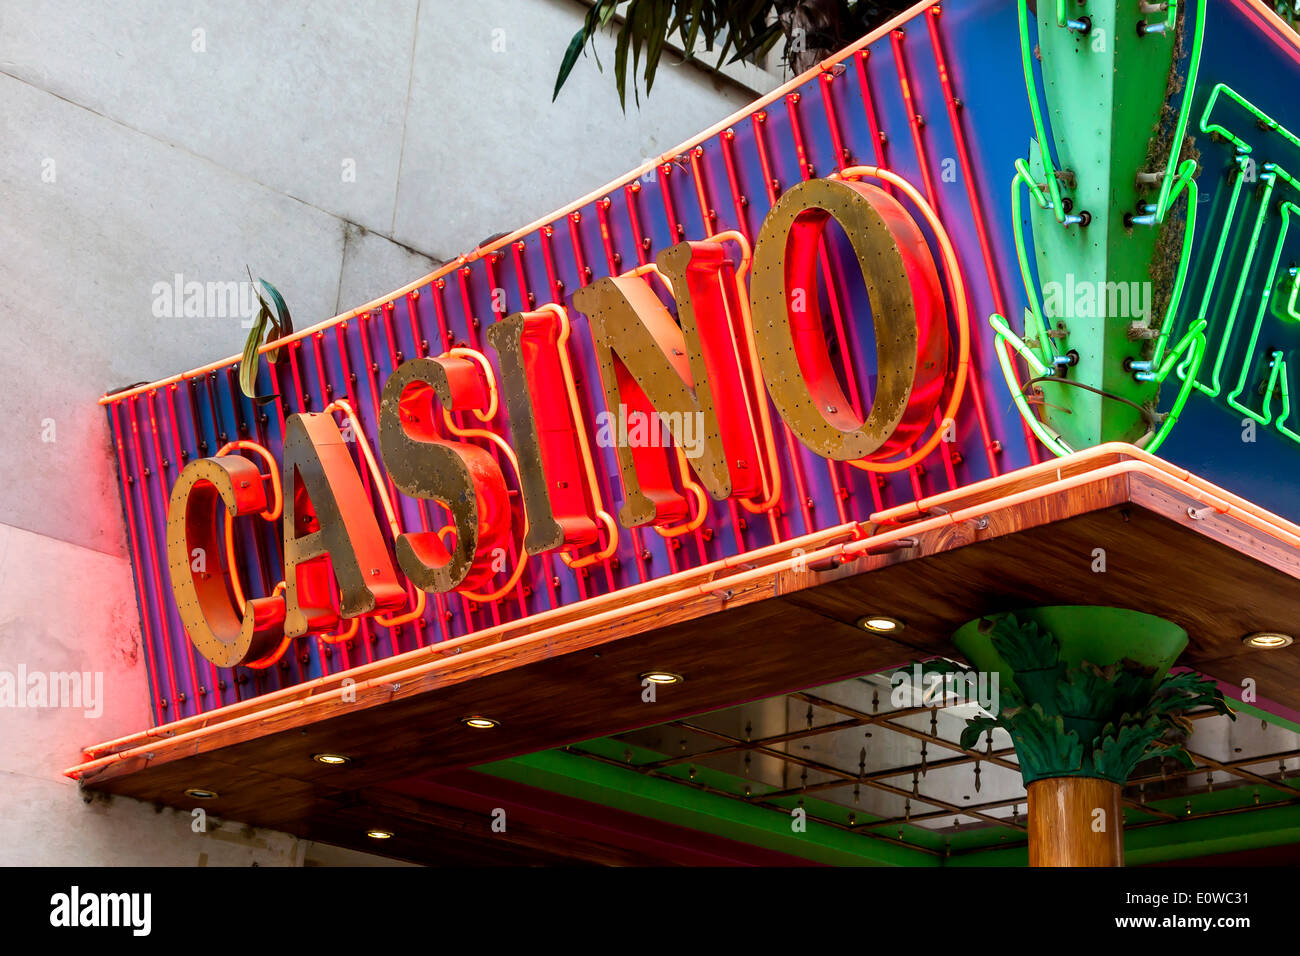 Neon signs, 'Casino' lettering, Budapest, Hungary Stock Photo